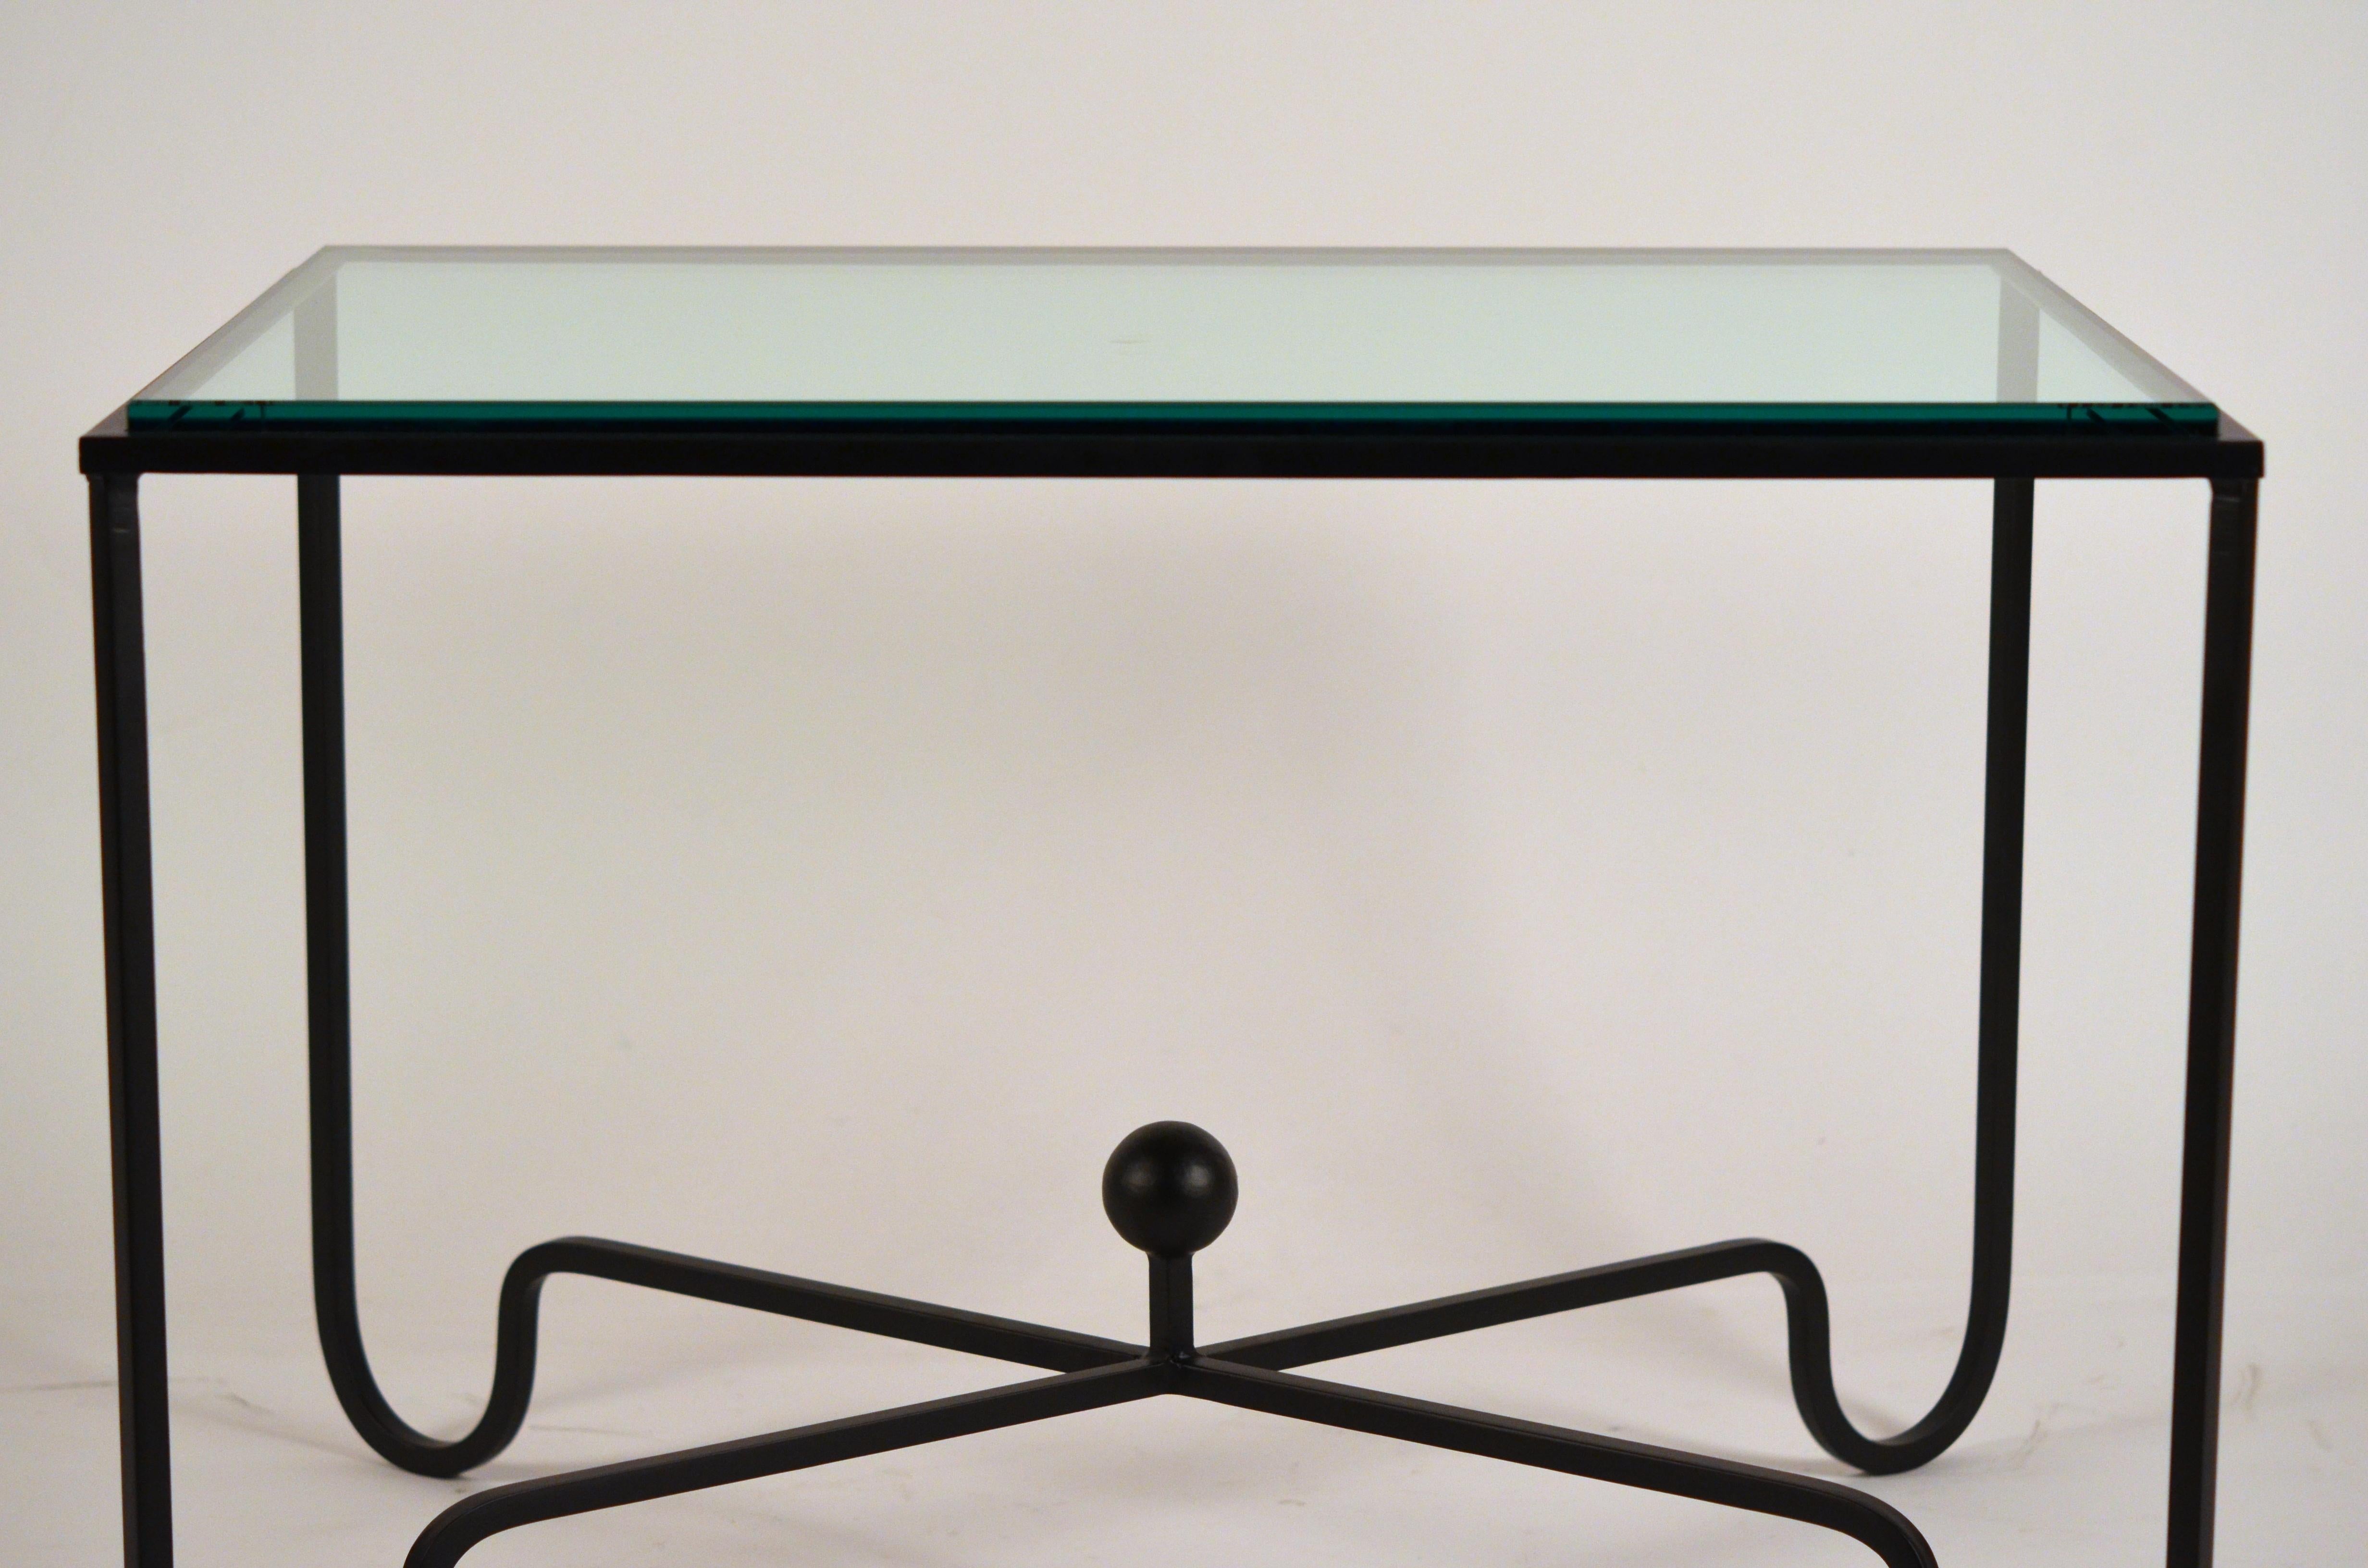 French Chic Blackened Steel and Glass 'Entretoise' Side Table by Design Frères For Sale